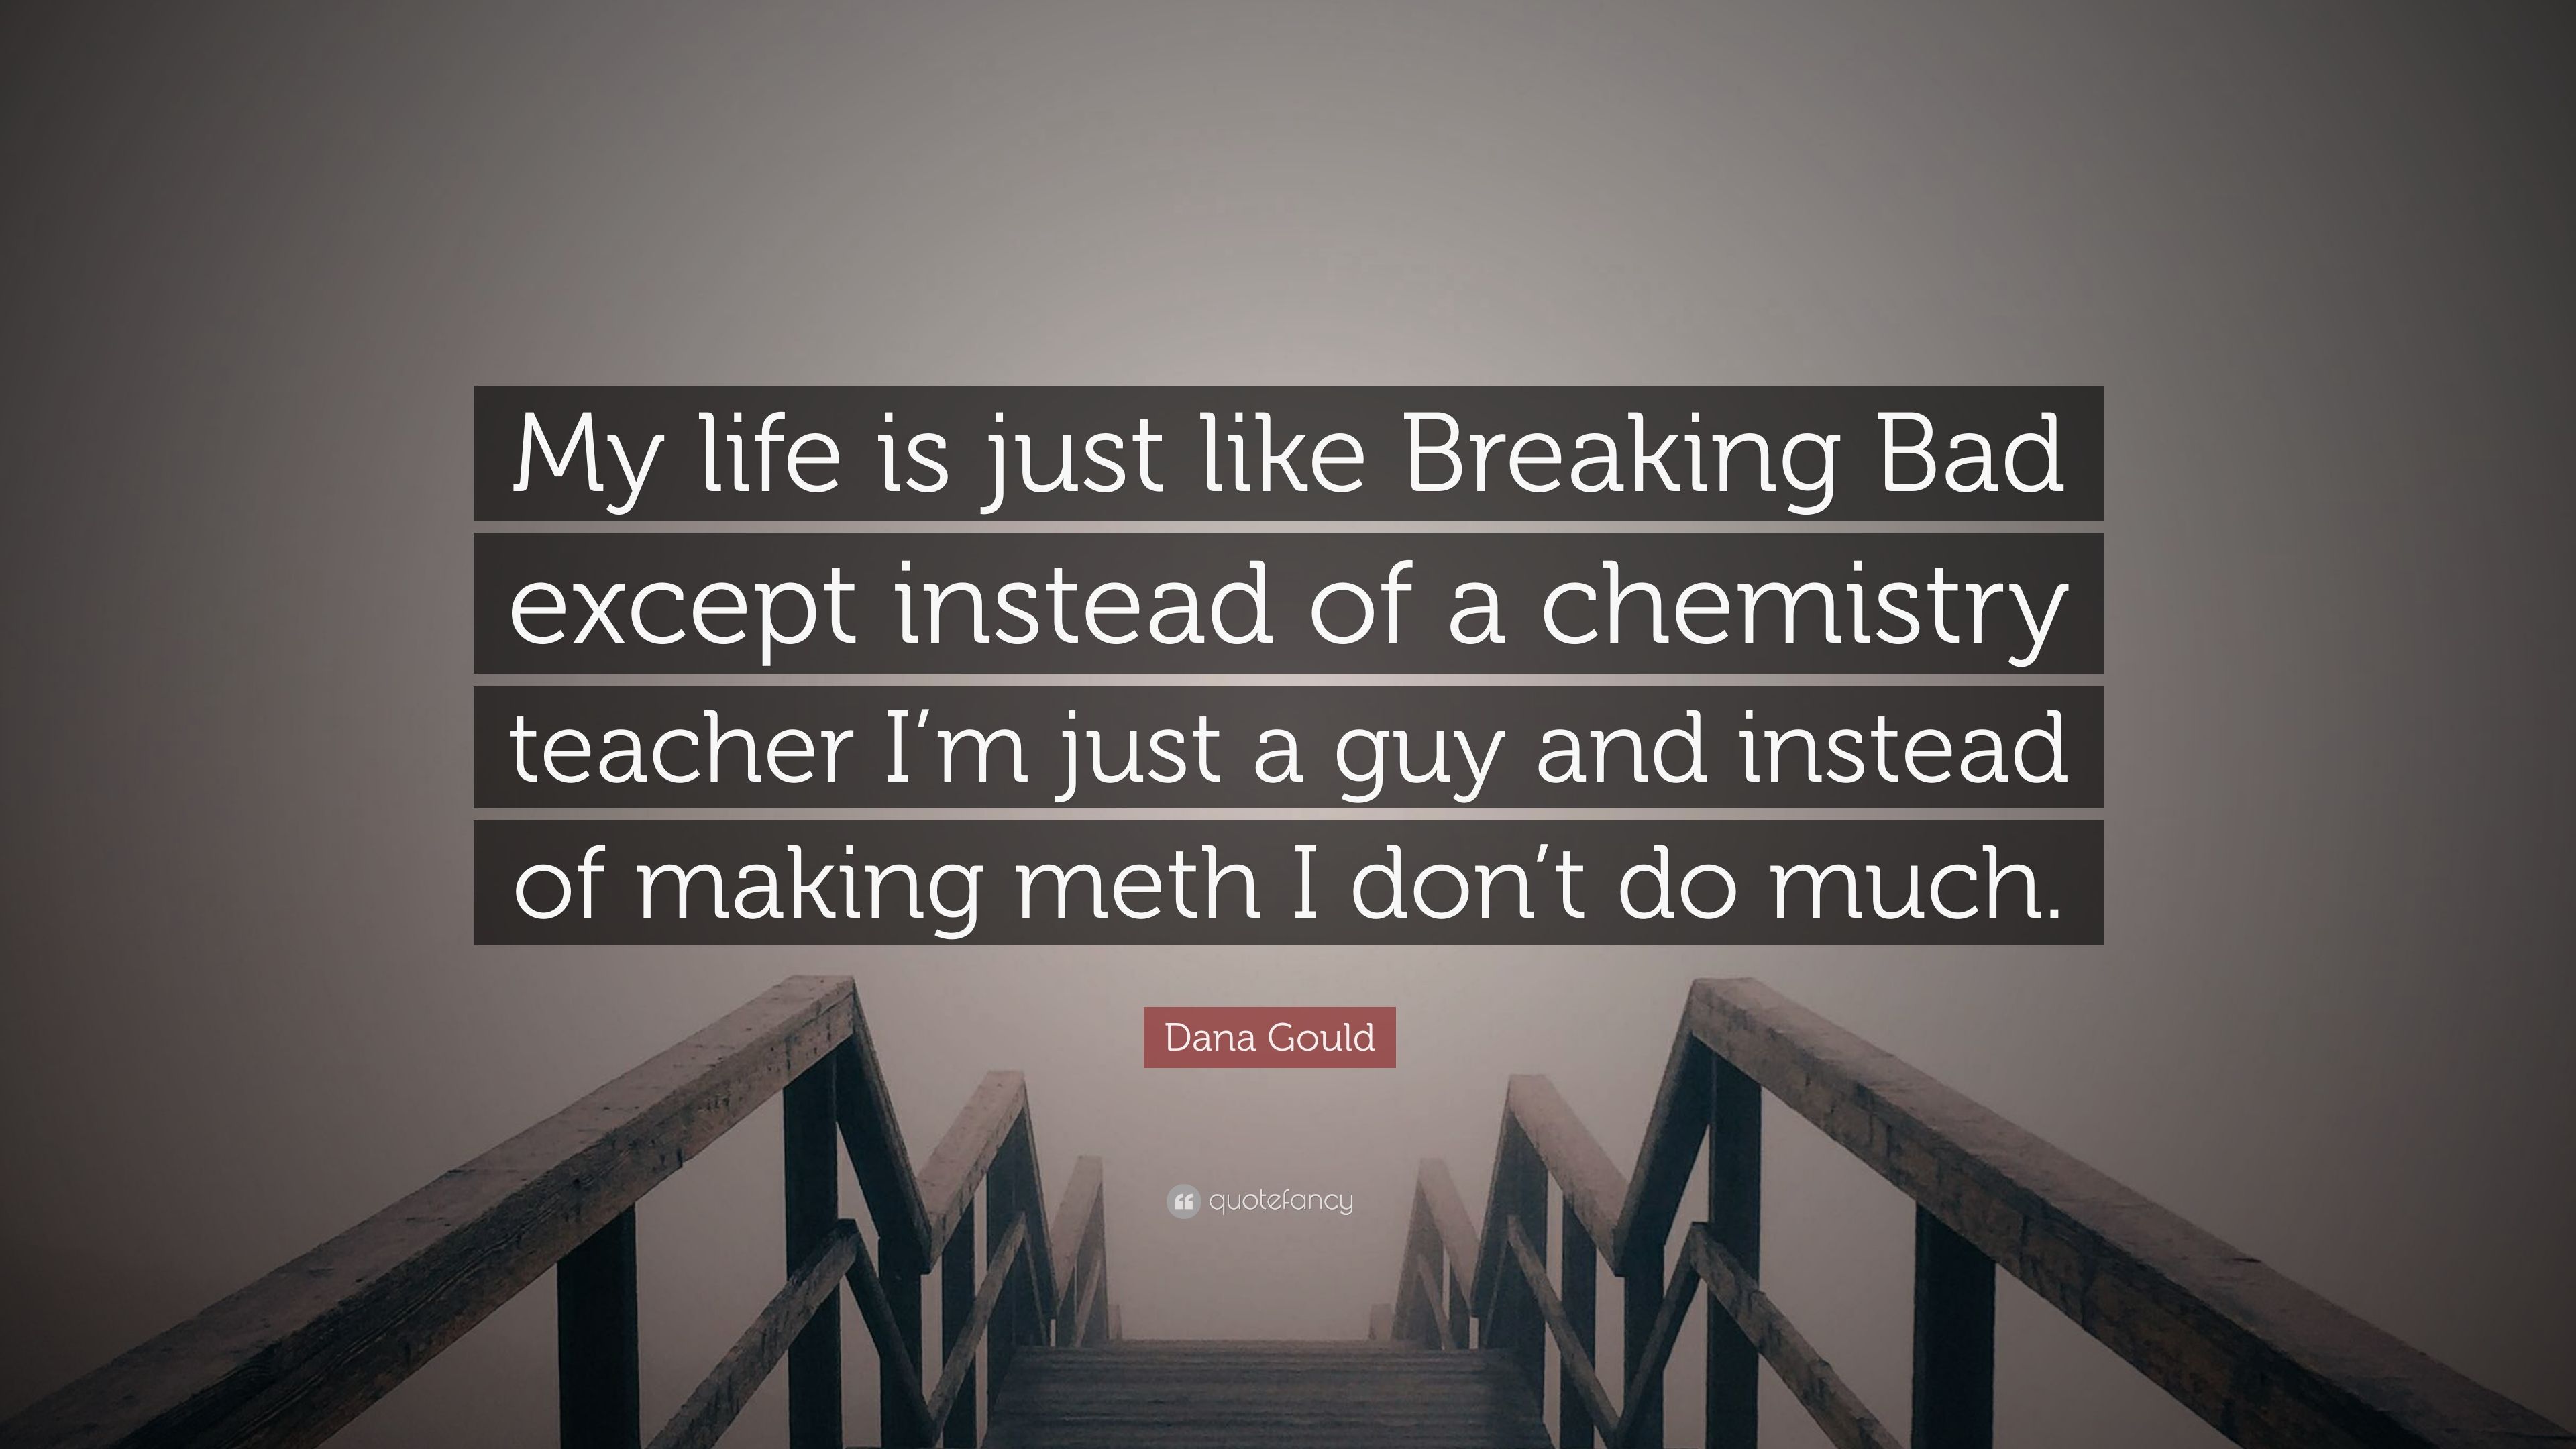 Dana Gould Quote: “My life is just like Breaking Bad except instead of a chemistry teacher I'm just a guy and instead of making meth I don'.” (7 wallpaper)